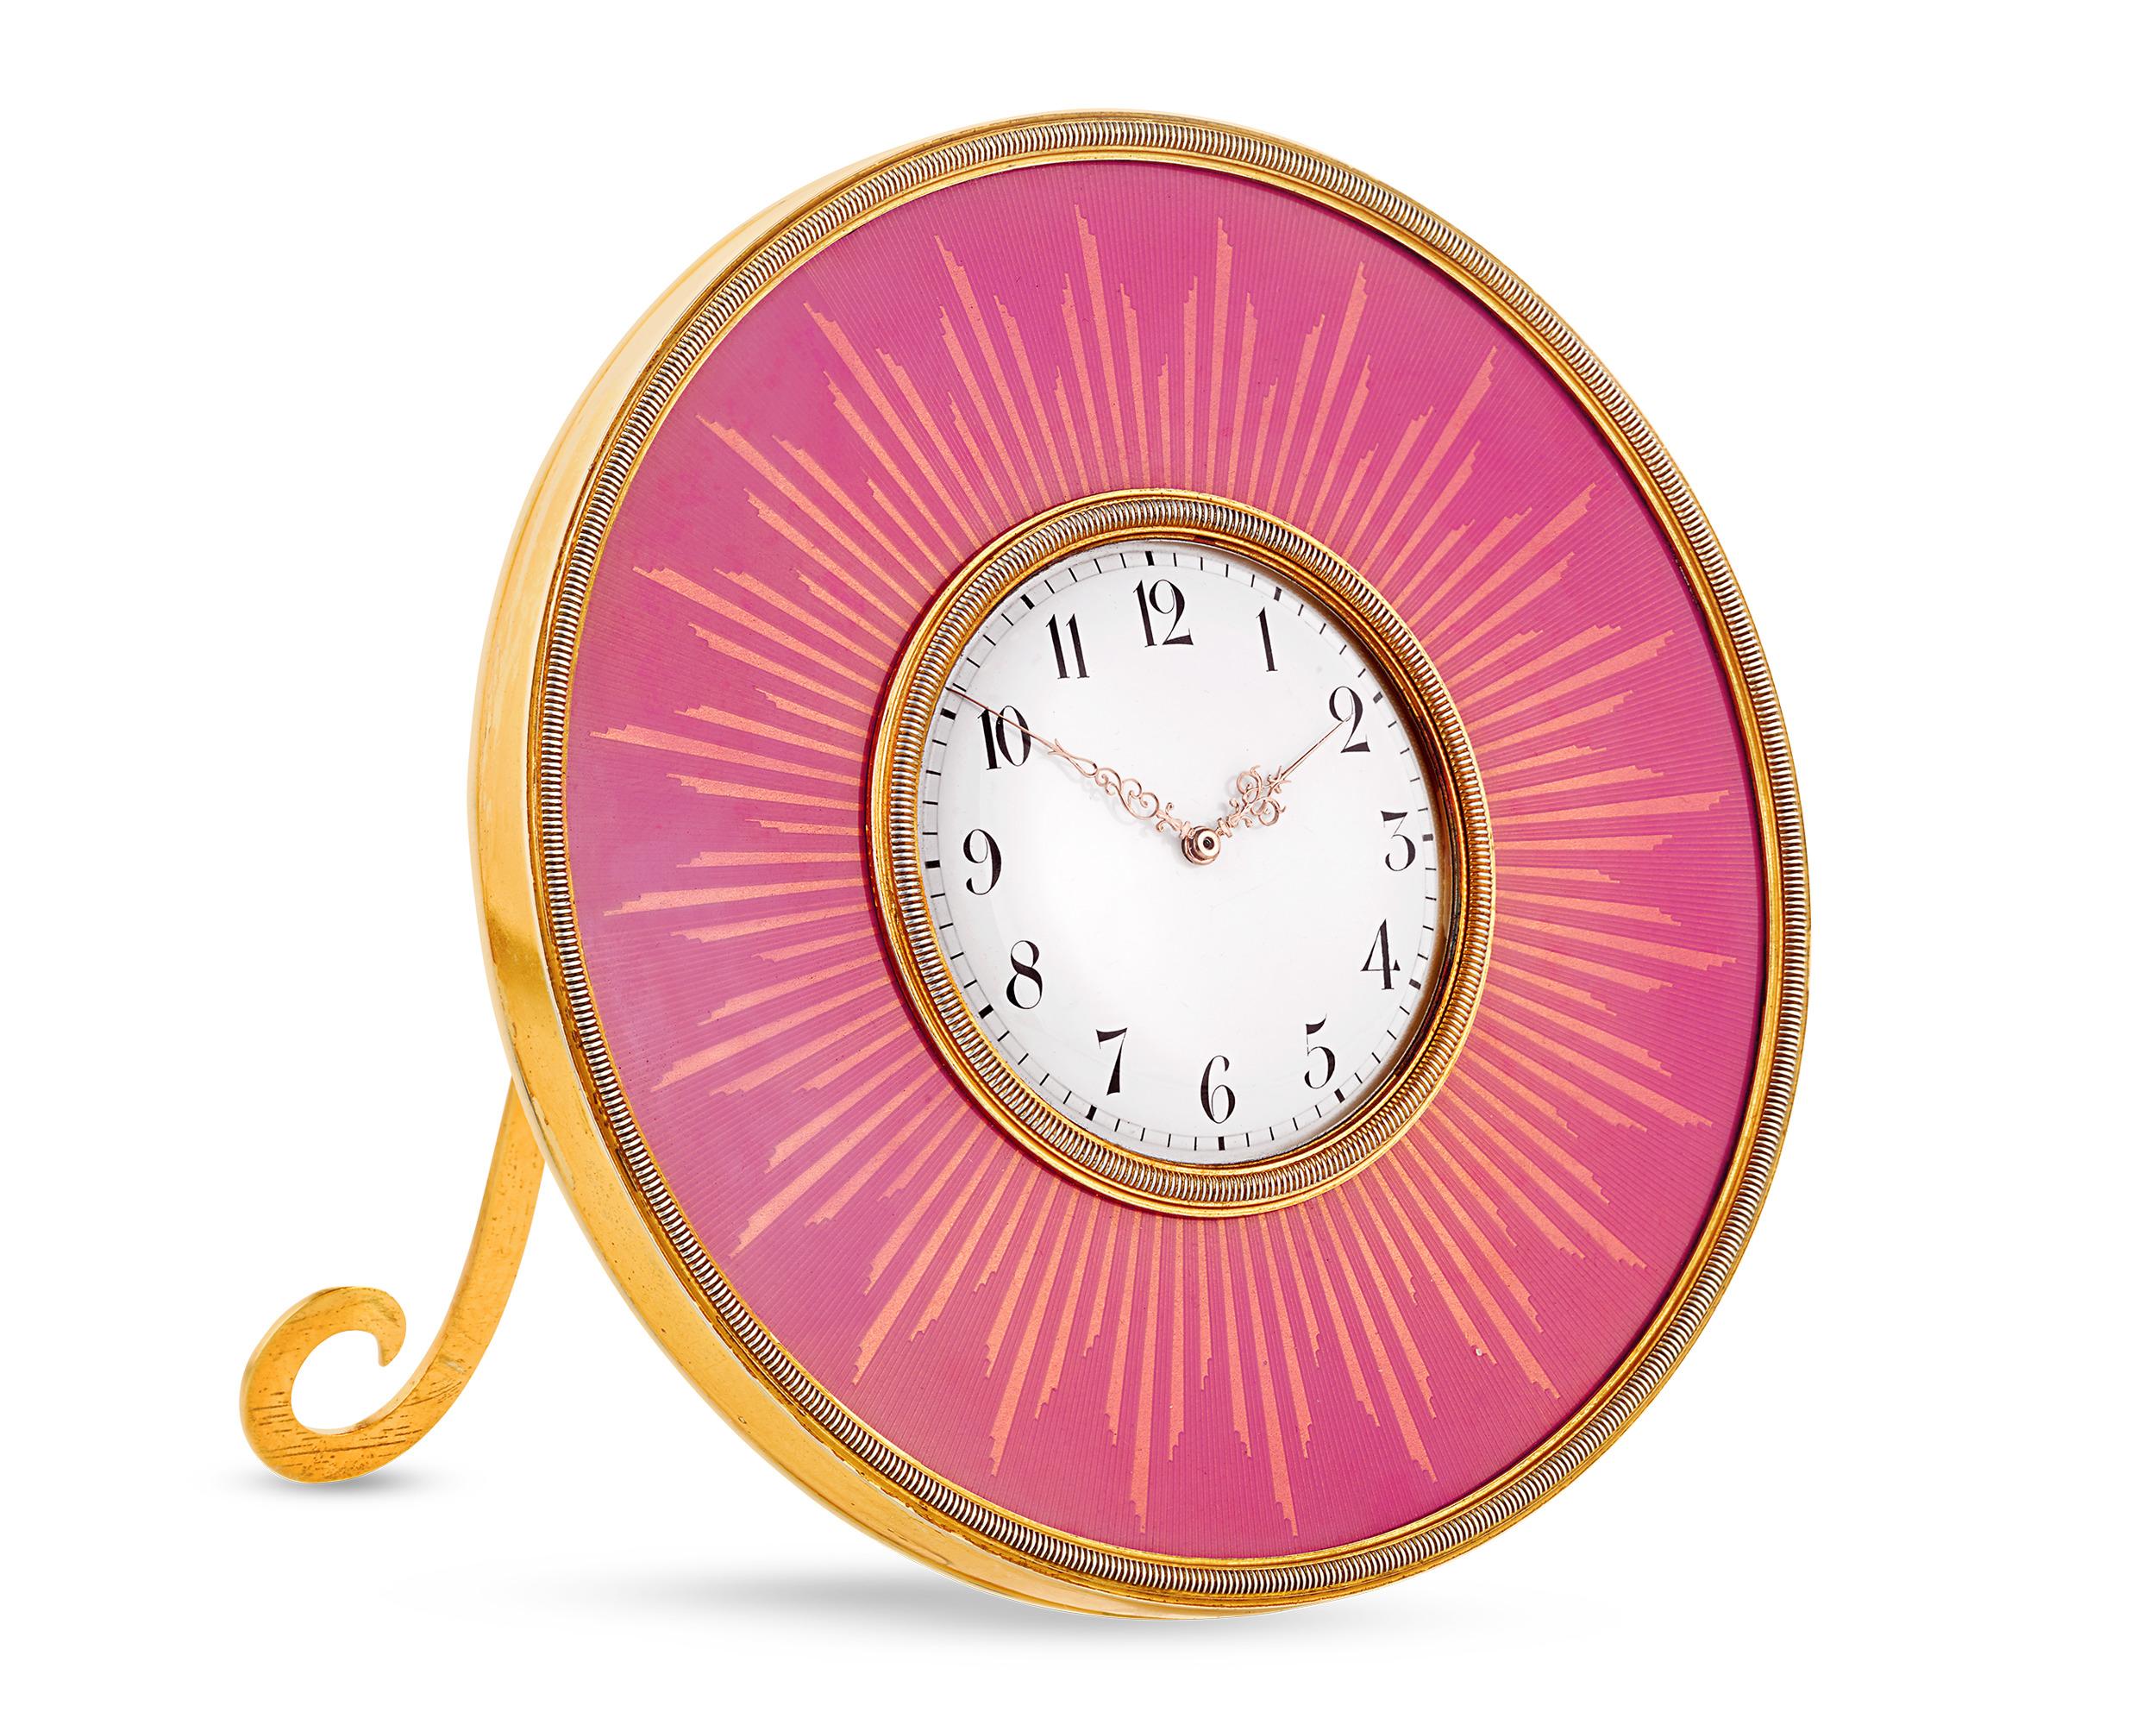 More than a simple clock, this timepiece by the revered Fabergé firm is a work of art. Created circa 1900 during the golden age of Fabergé, this exquisite circular table clock is comprised of translucent rose pink enamel accented by silver gilt. The